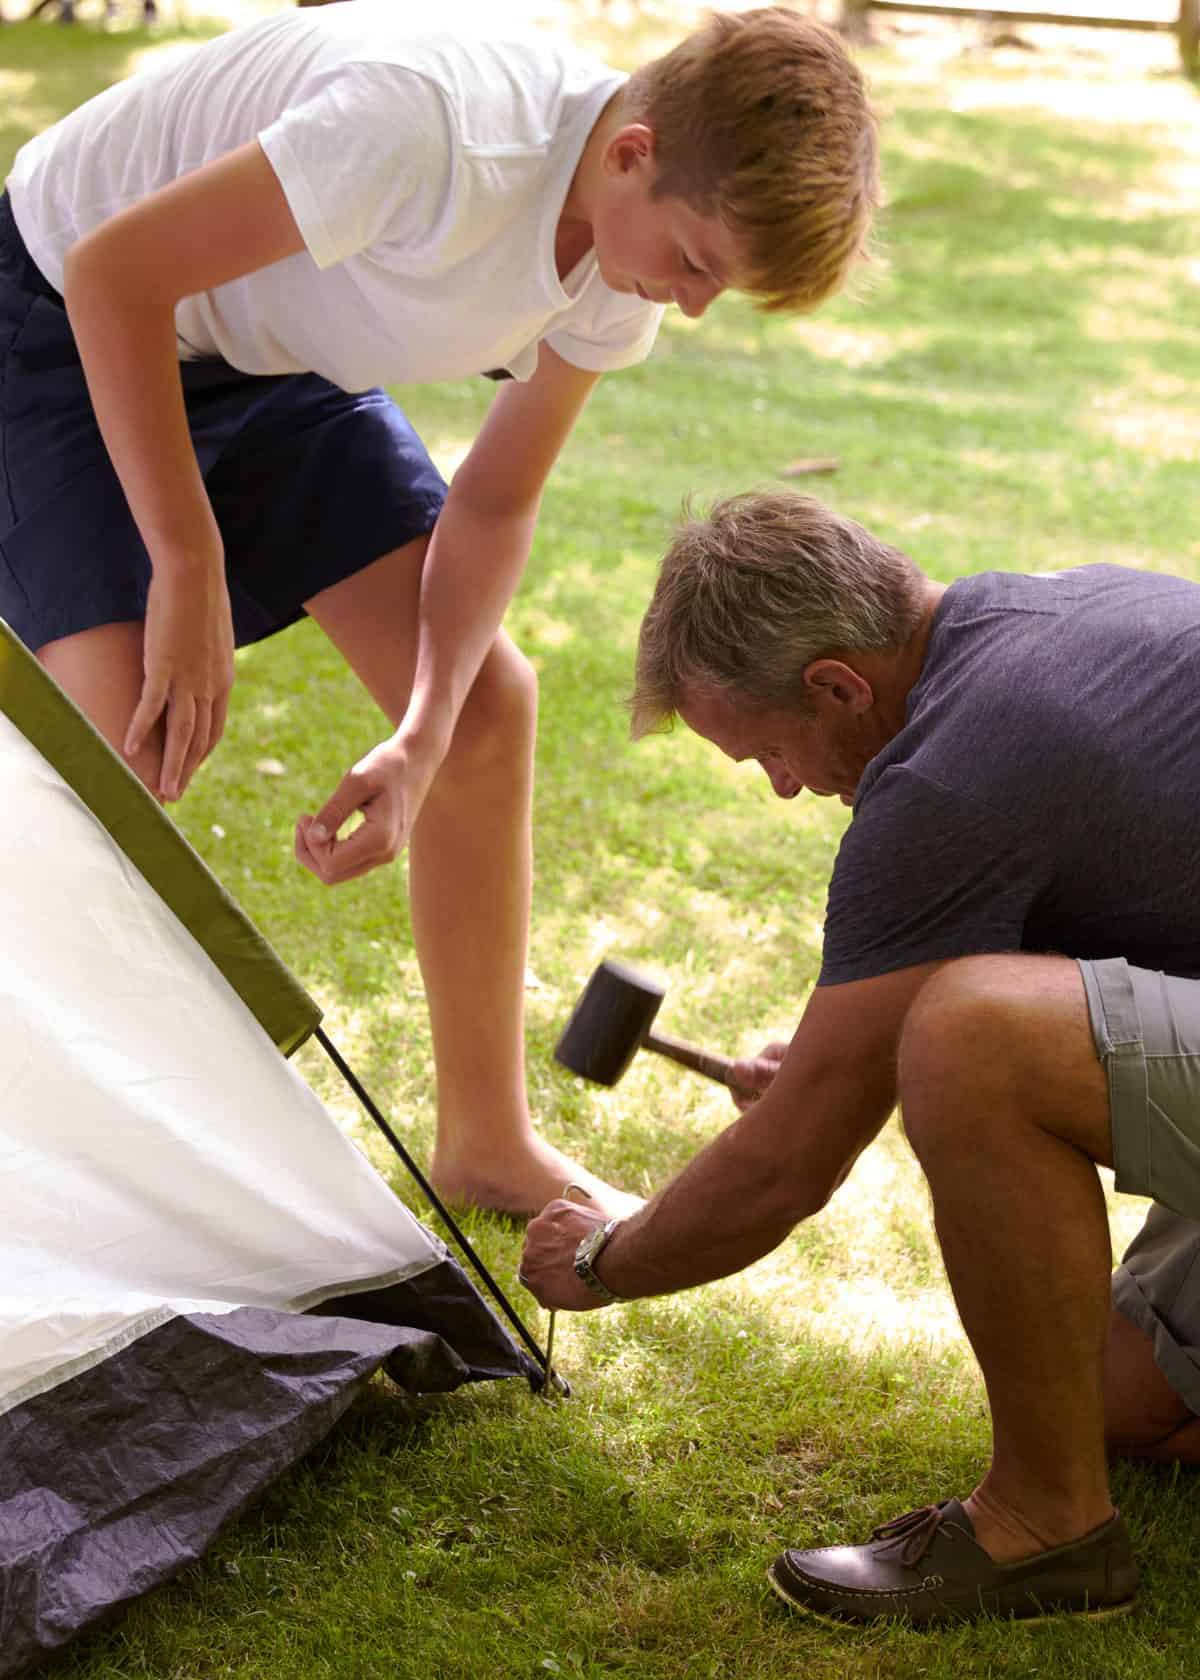 How to stake a tent for camping